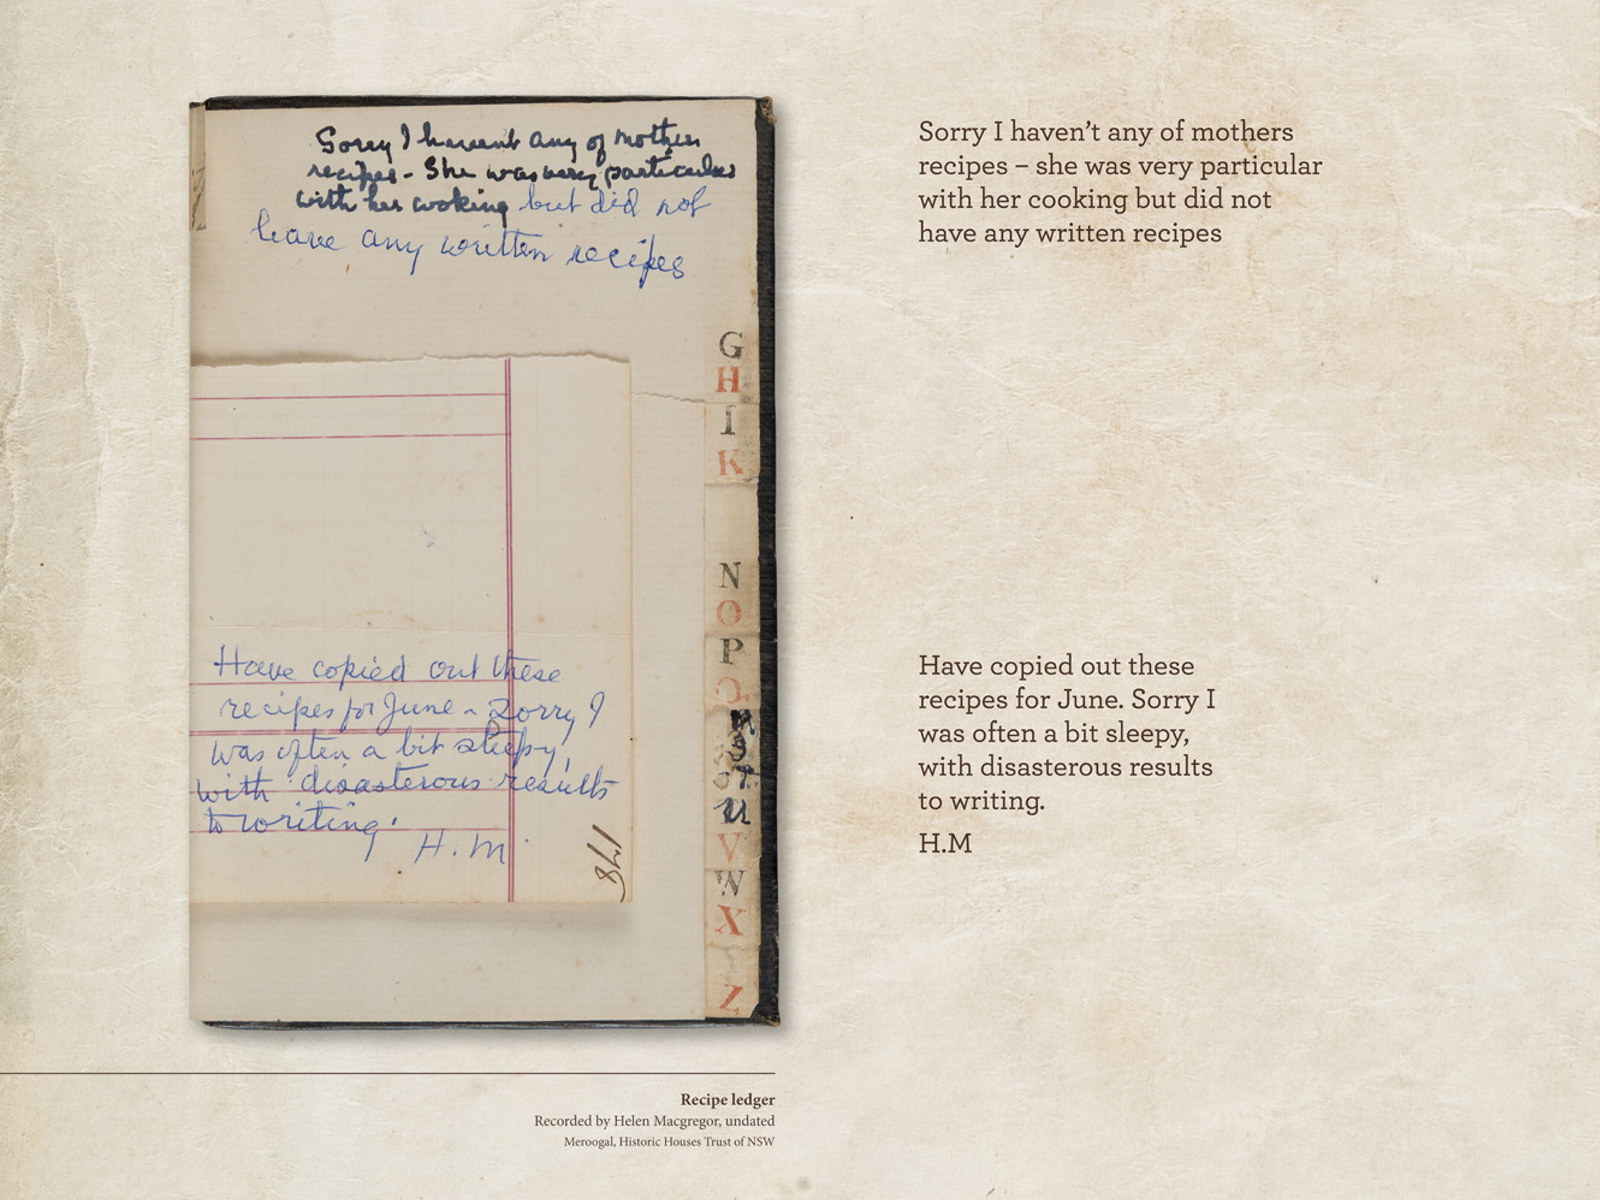 Scanned pages from manuscript of recipes including handwritten notes and transcription.